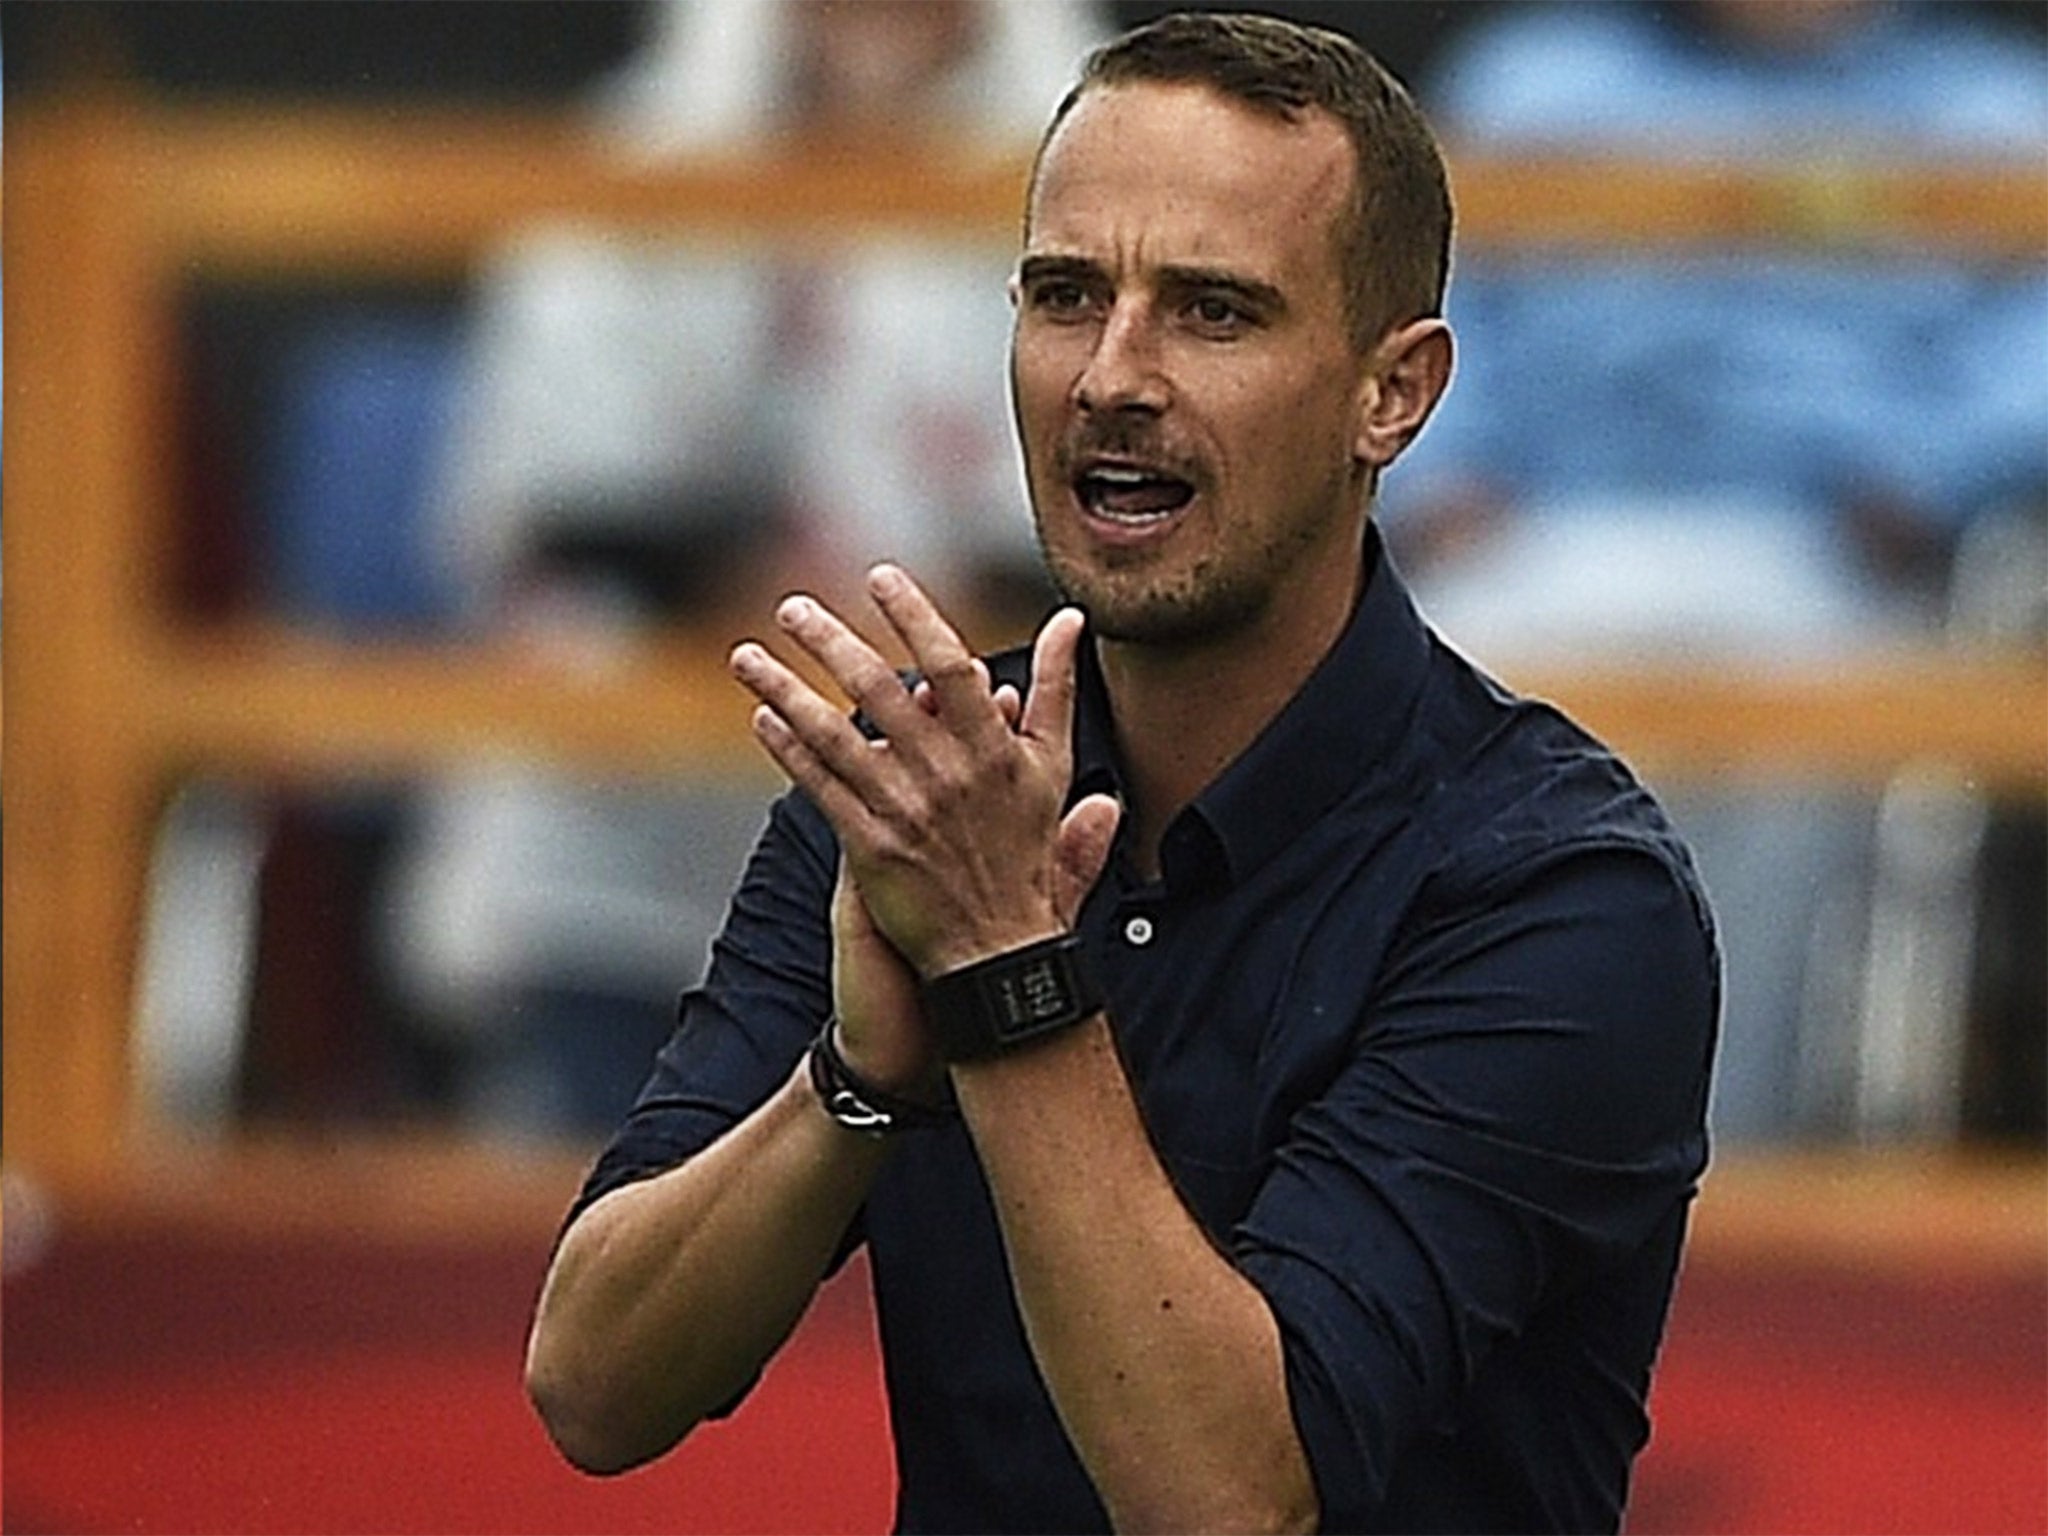 England's head coach Mark Sampson encourages his players from the sideline